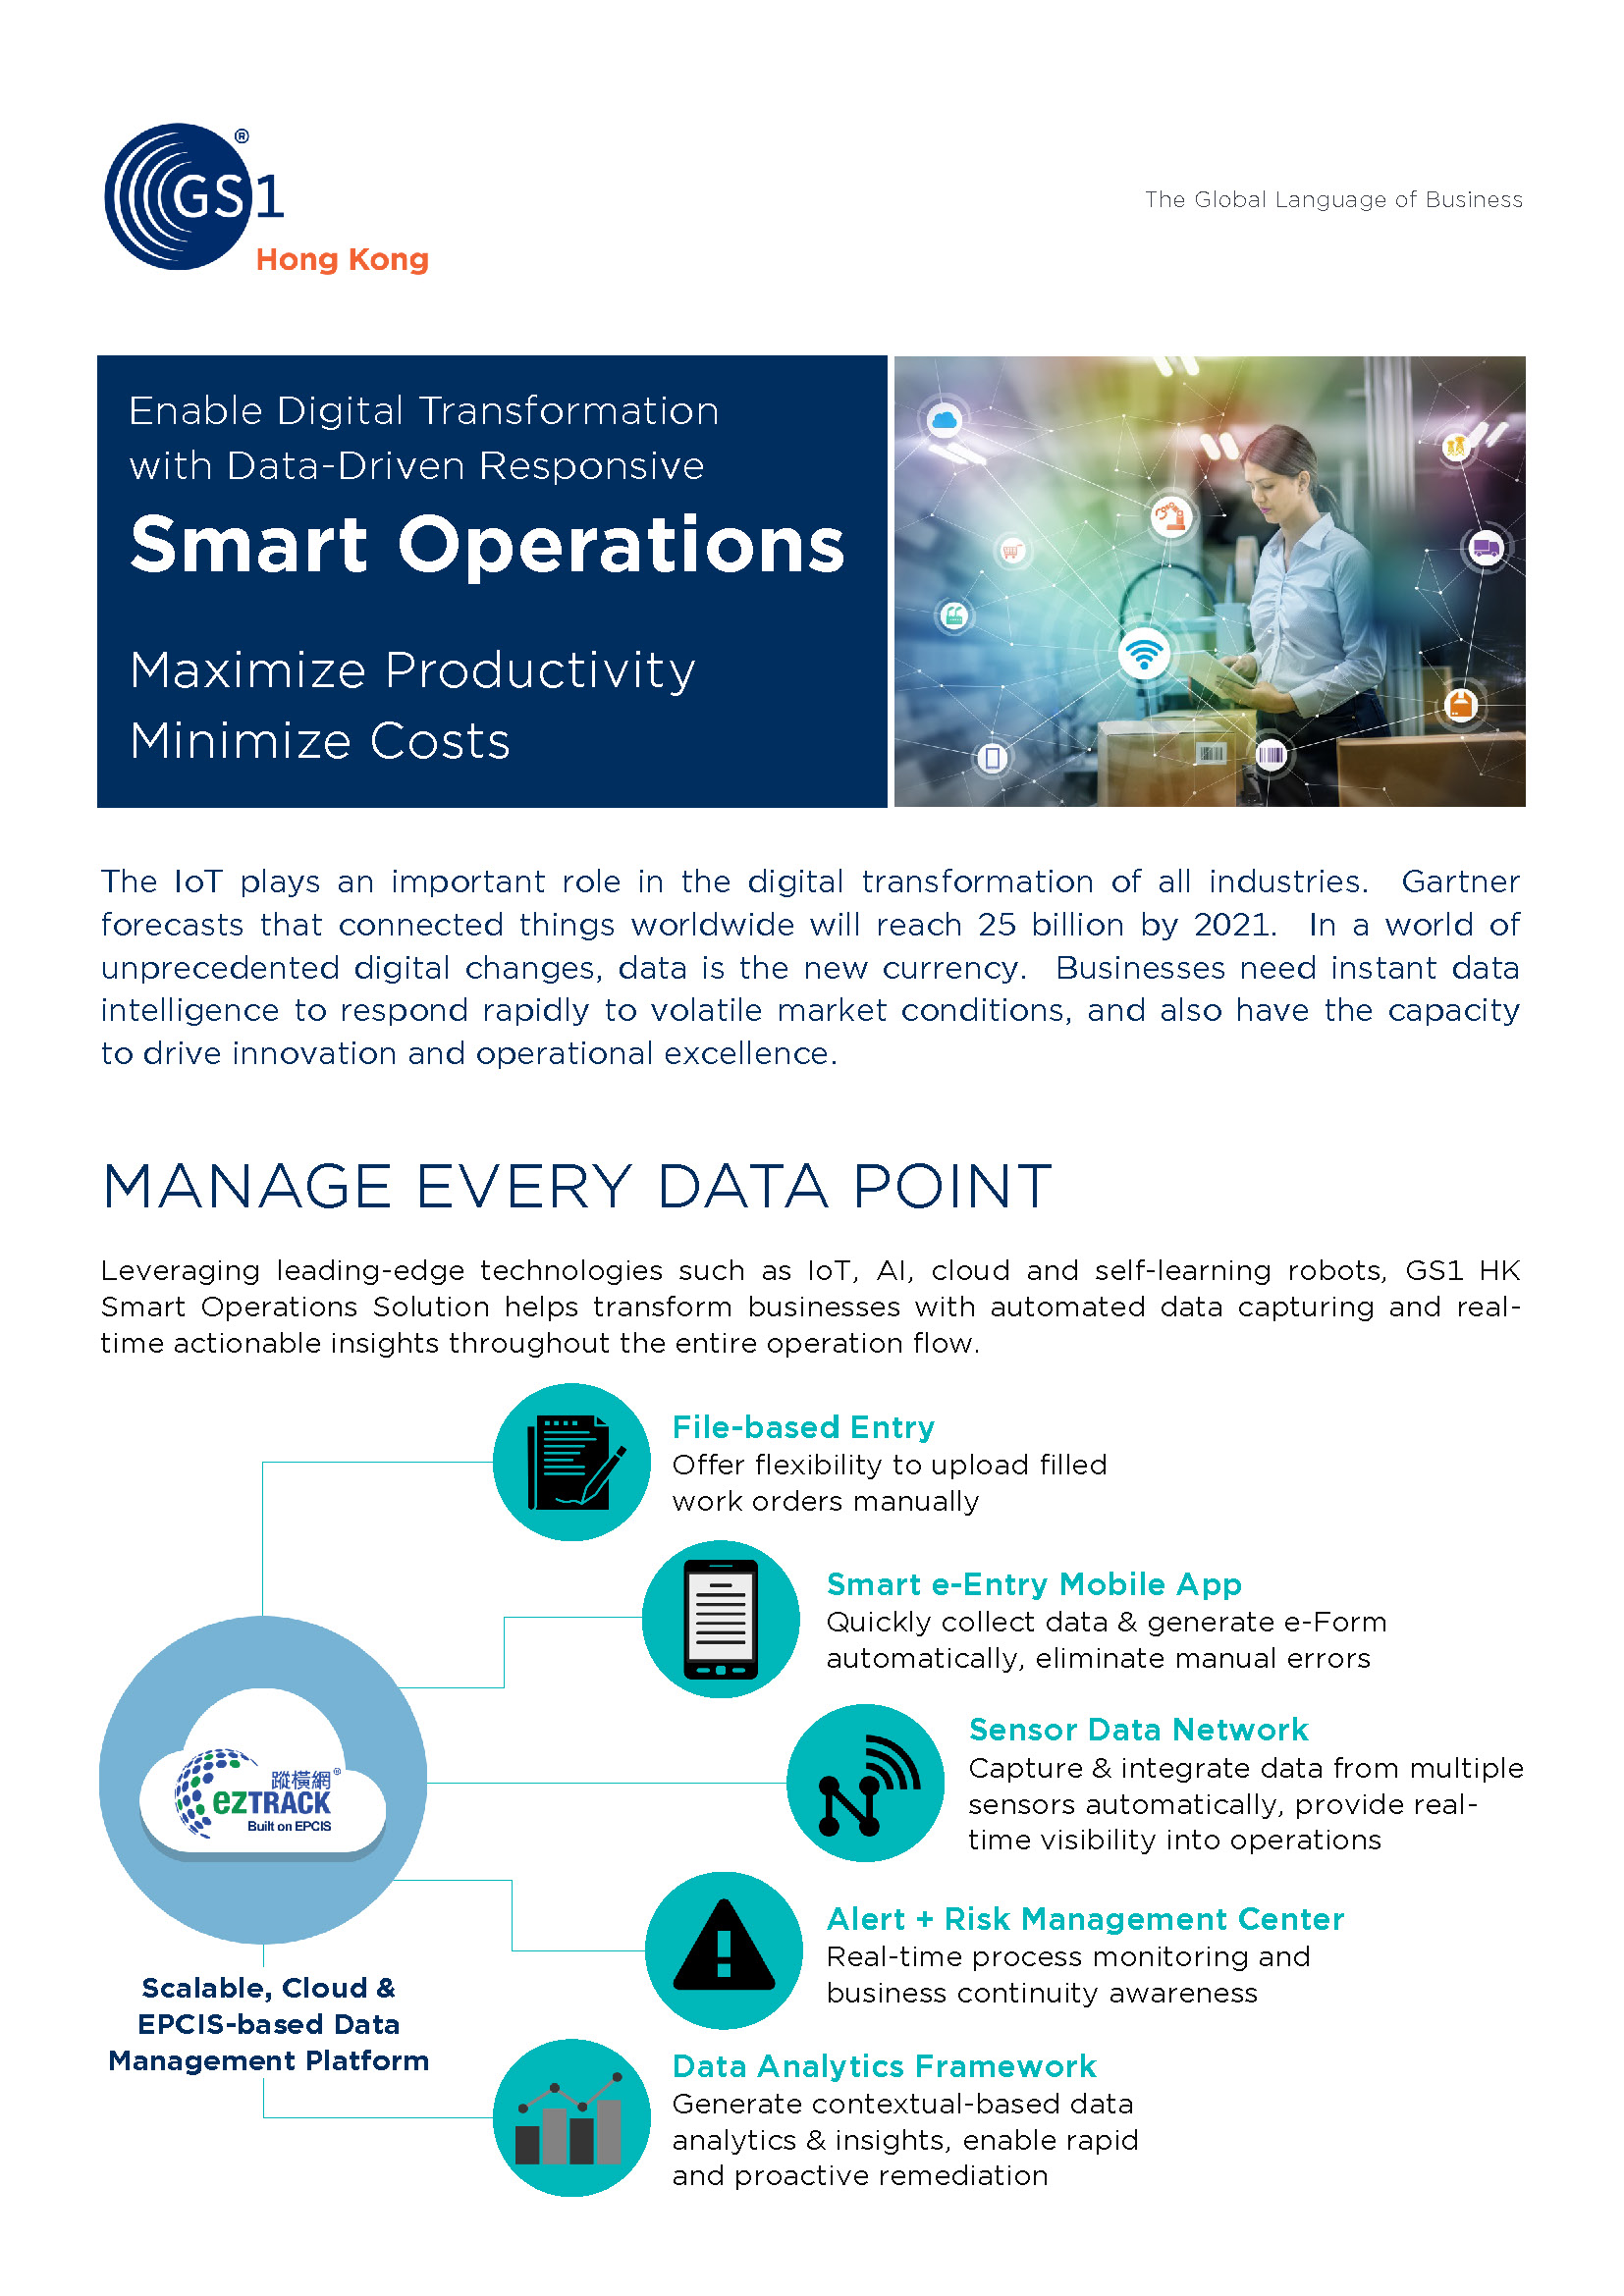 Smart Operations - Enable Digital Transformation with Data-Driven Responsive